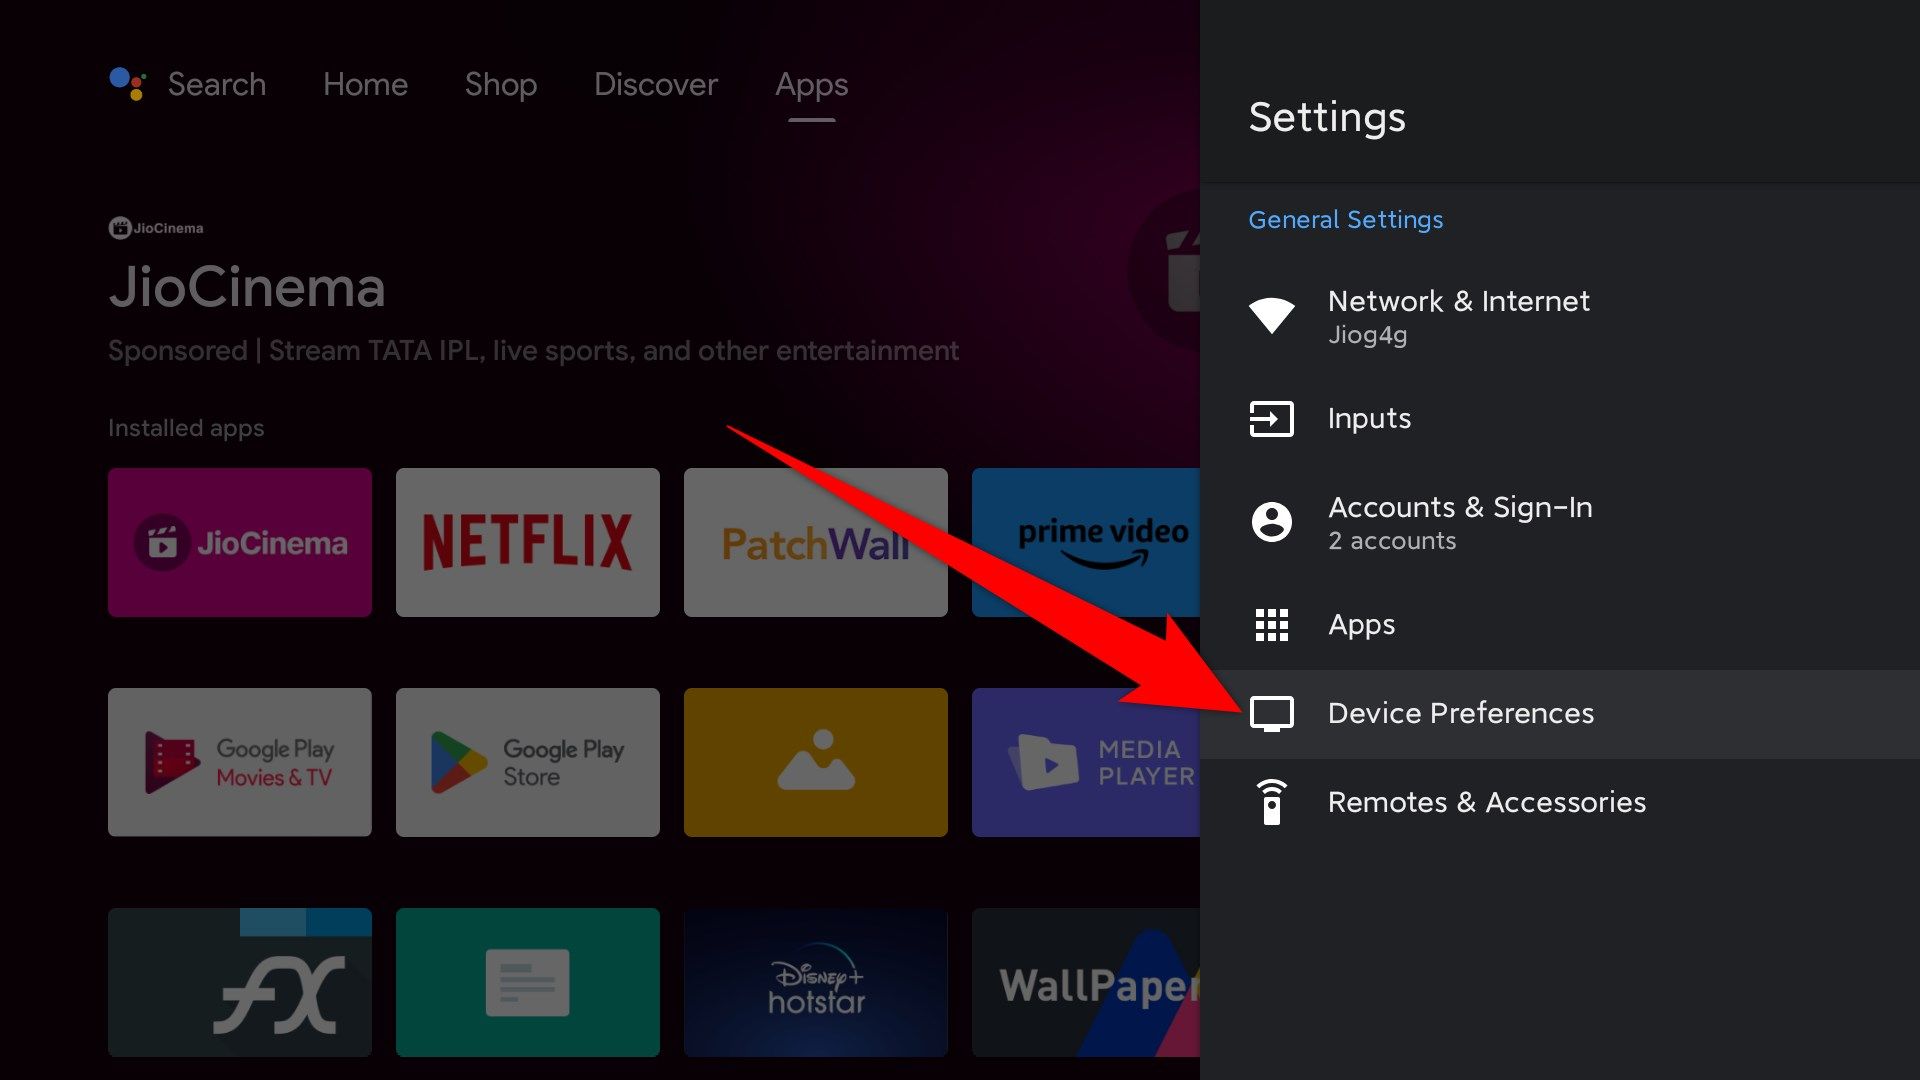 Device Preferences option in Android TV